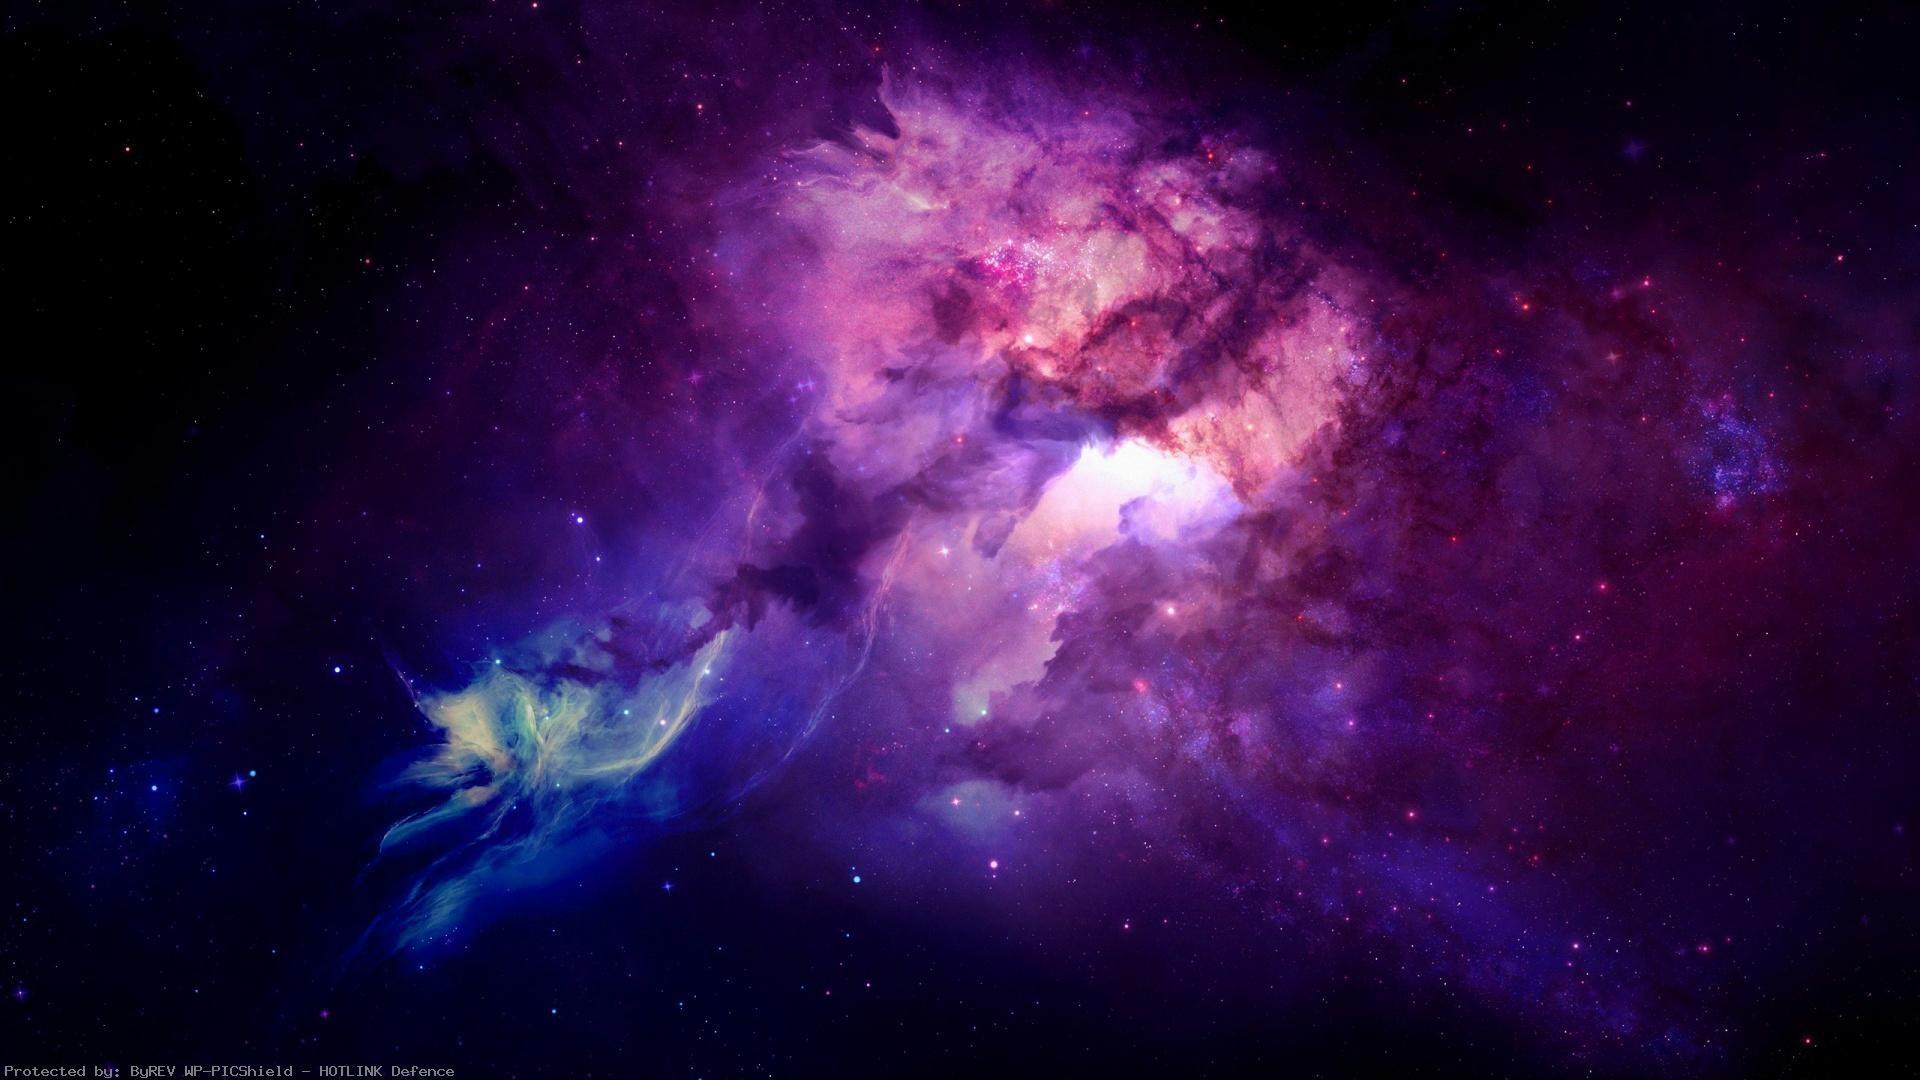 Galaxy PS4 Wallpaper Free Galaxy PS4 Background